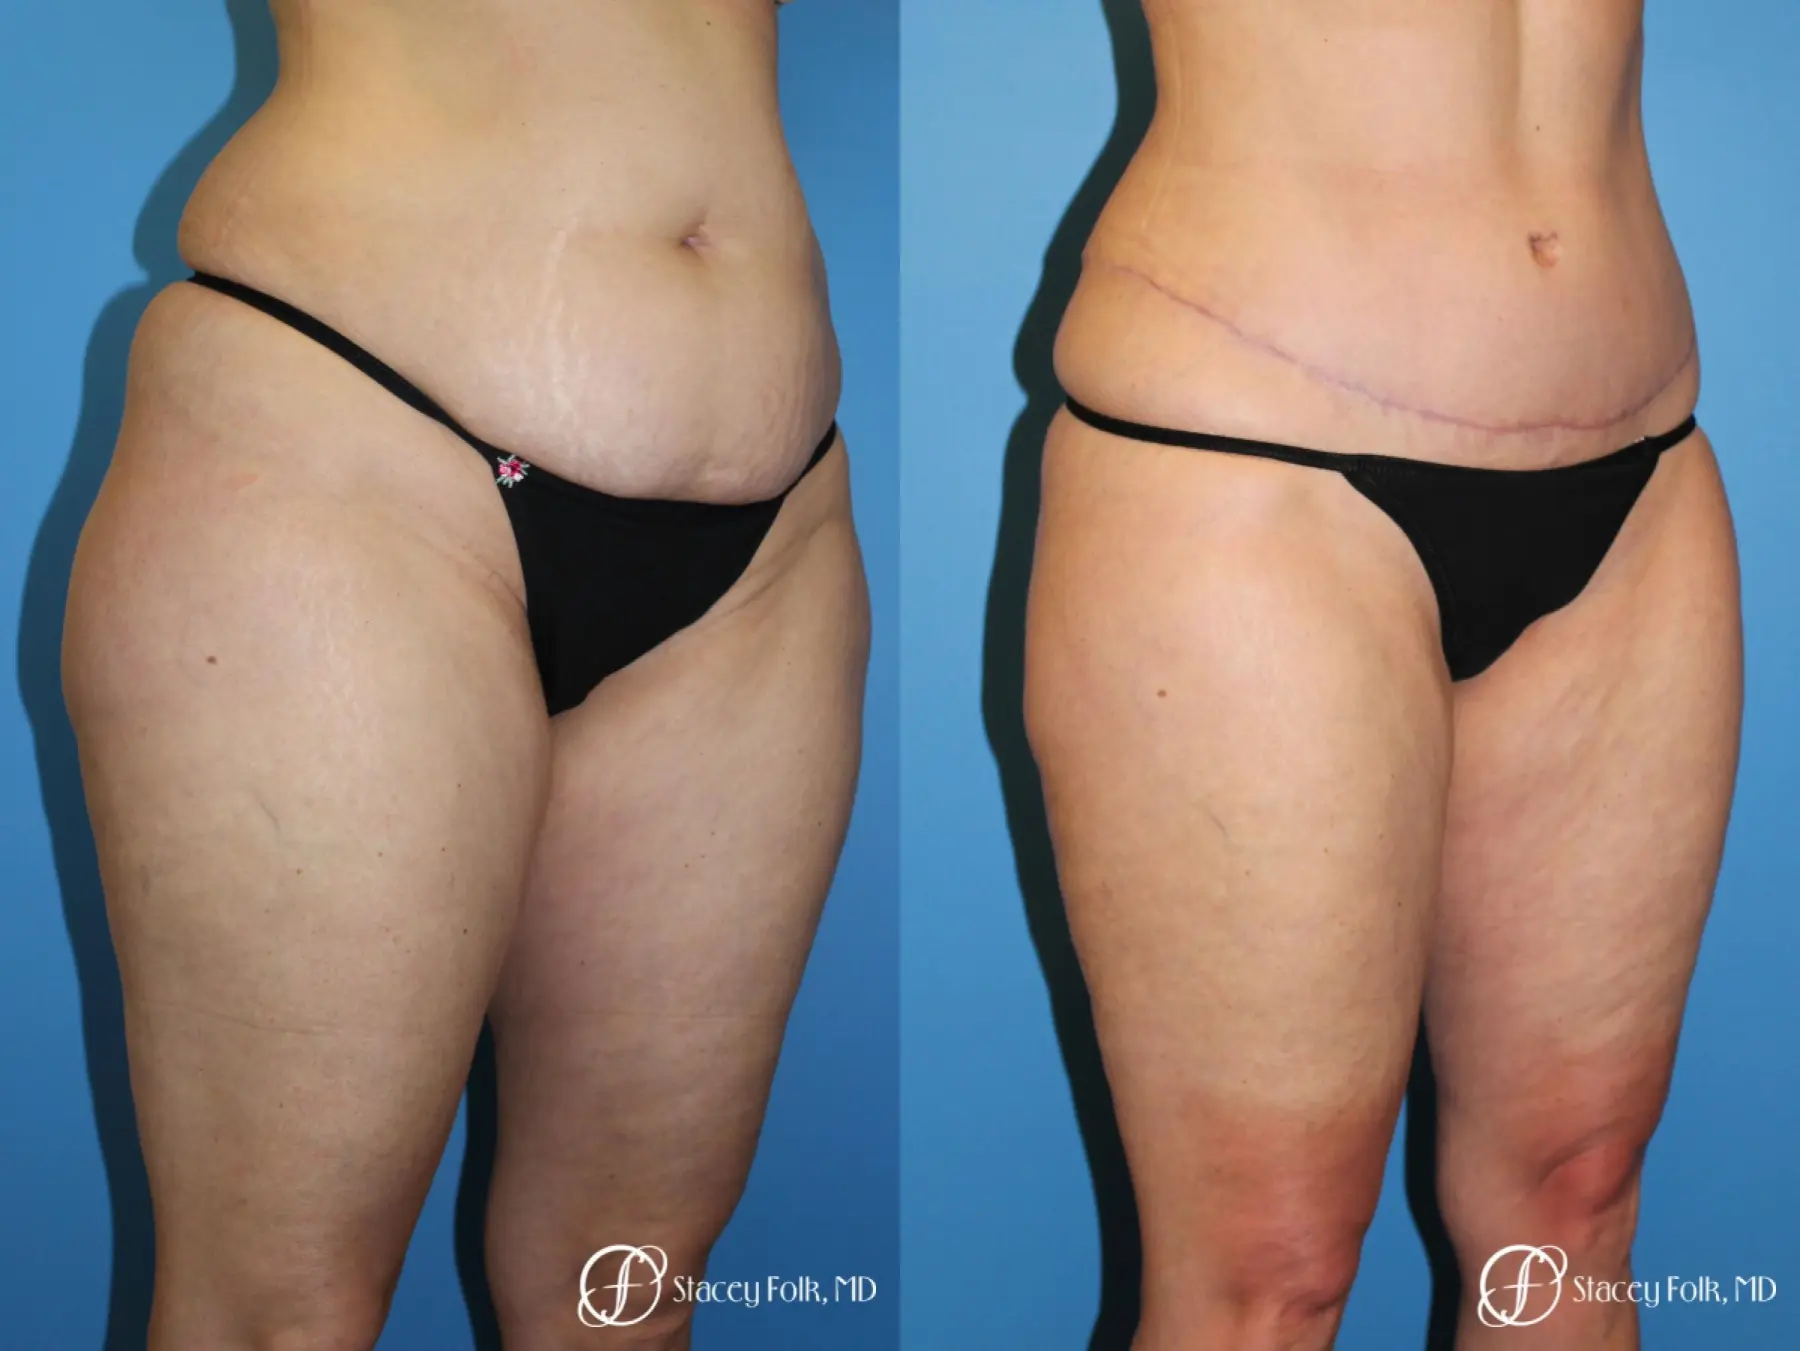 Tummy Tuck - Abdominoplasty - Before and After 2